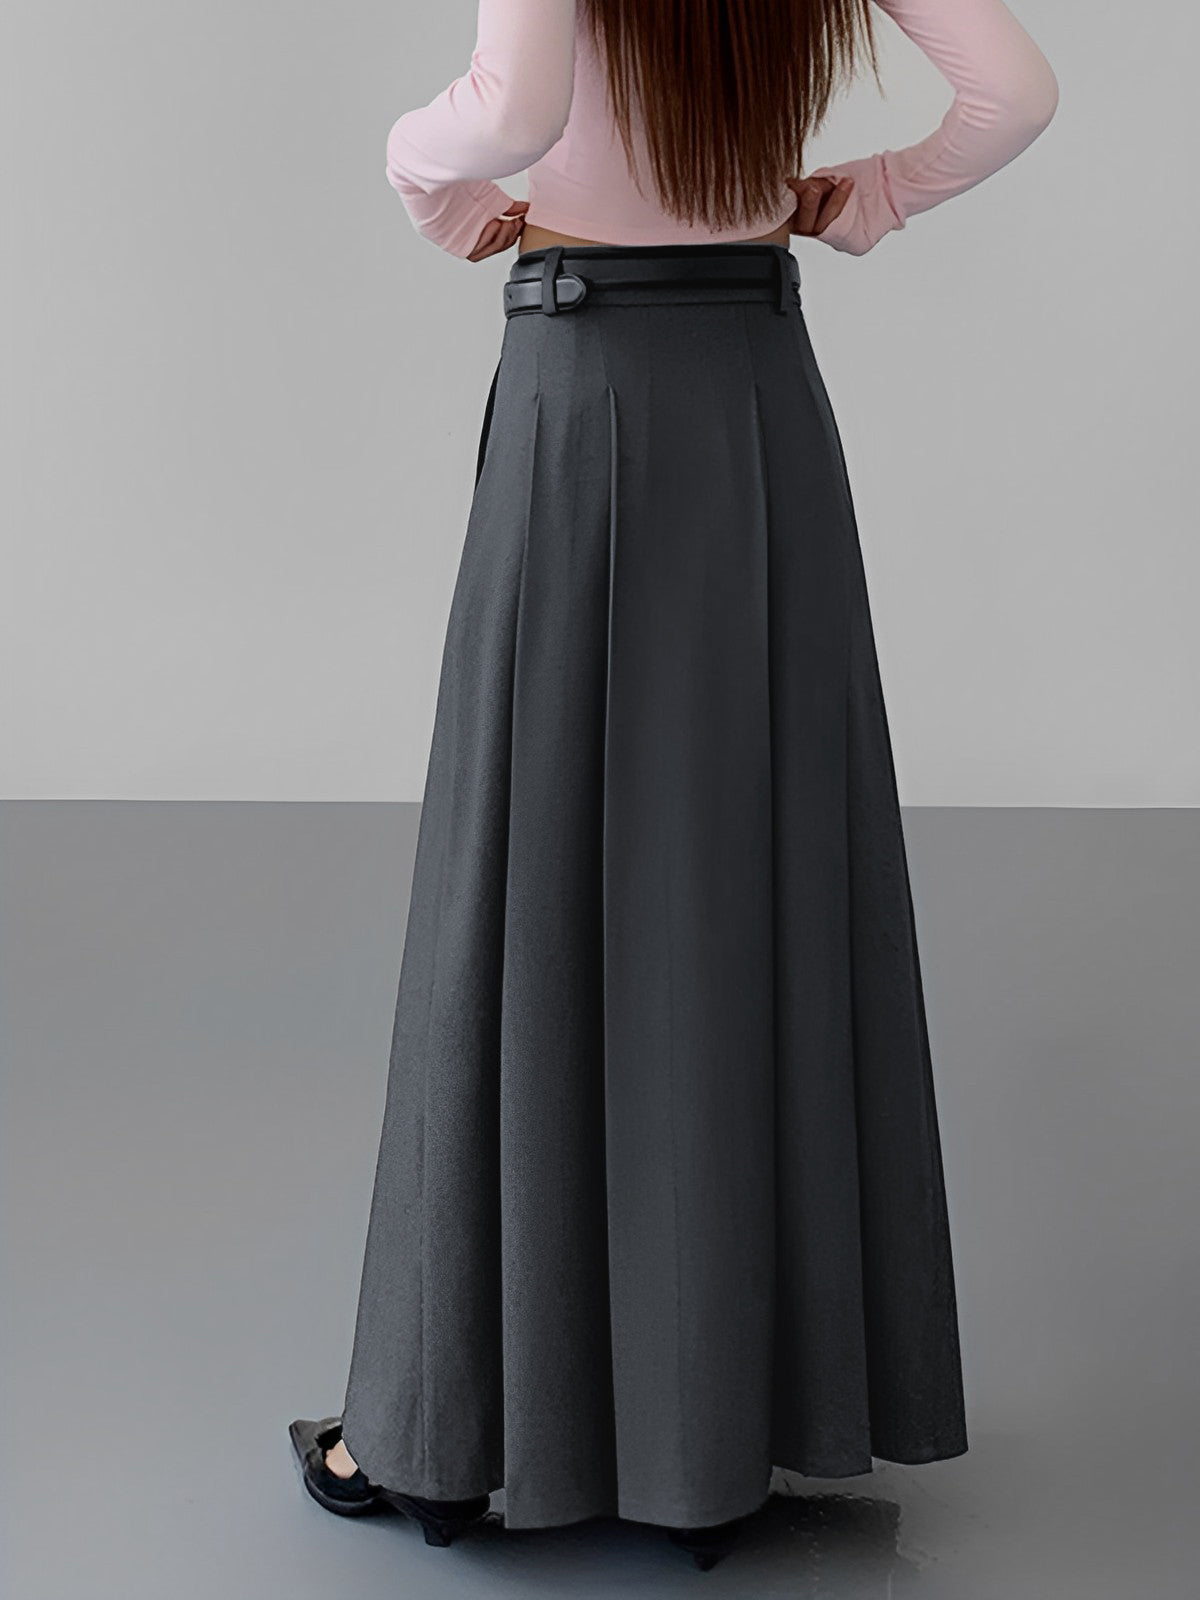 Unbelted Pleated Long Skirt